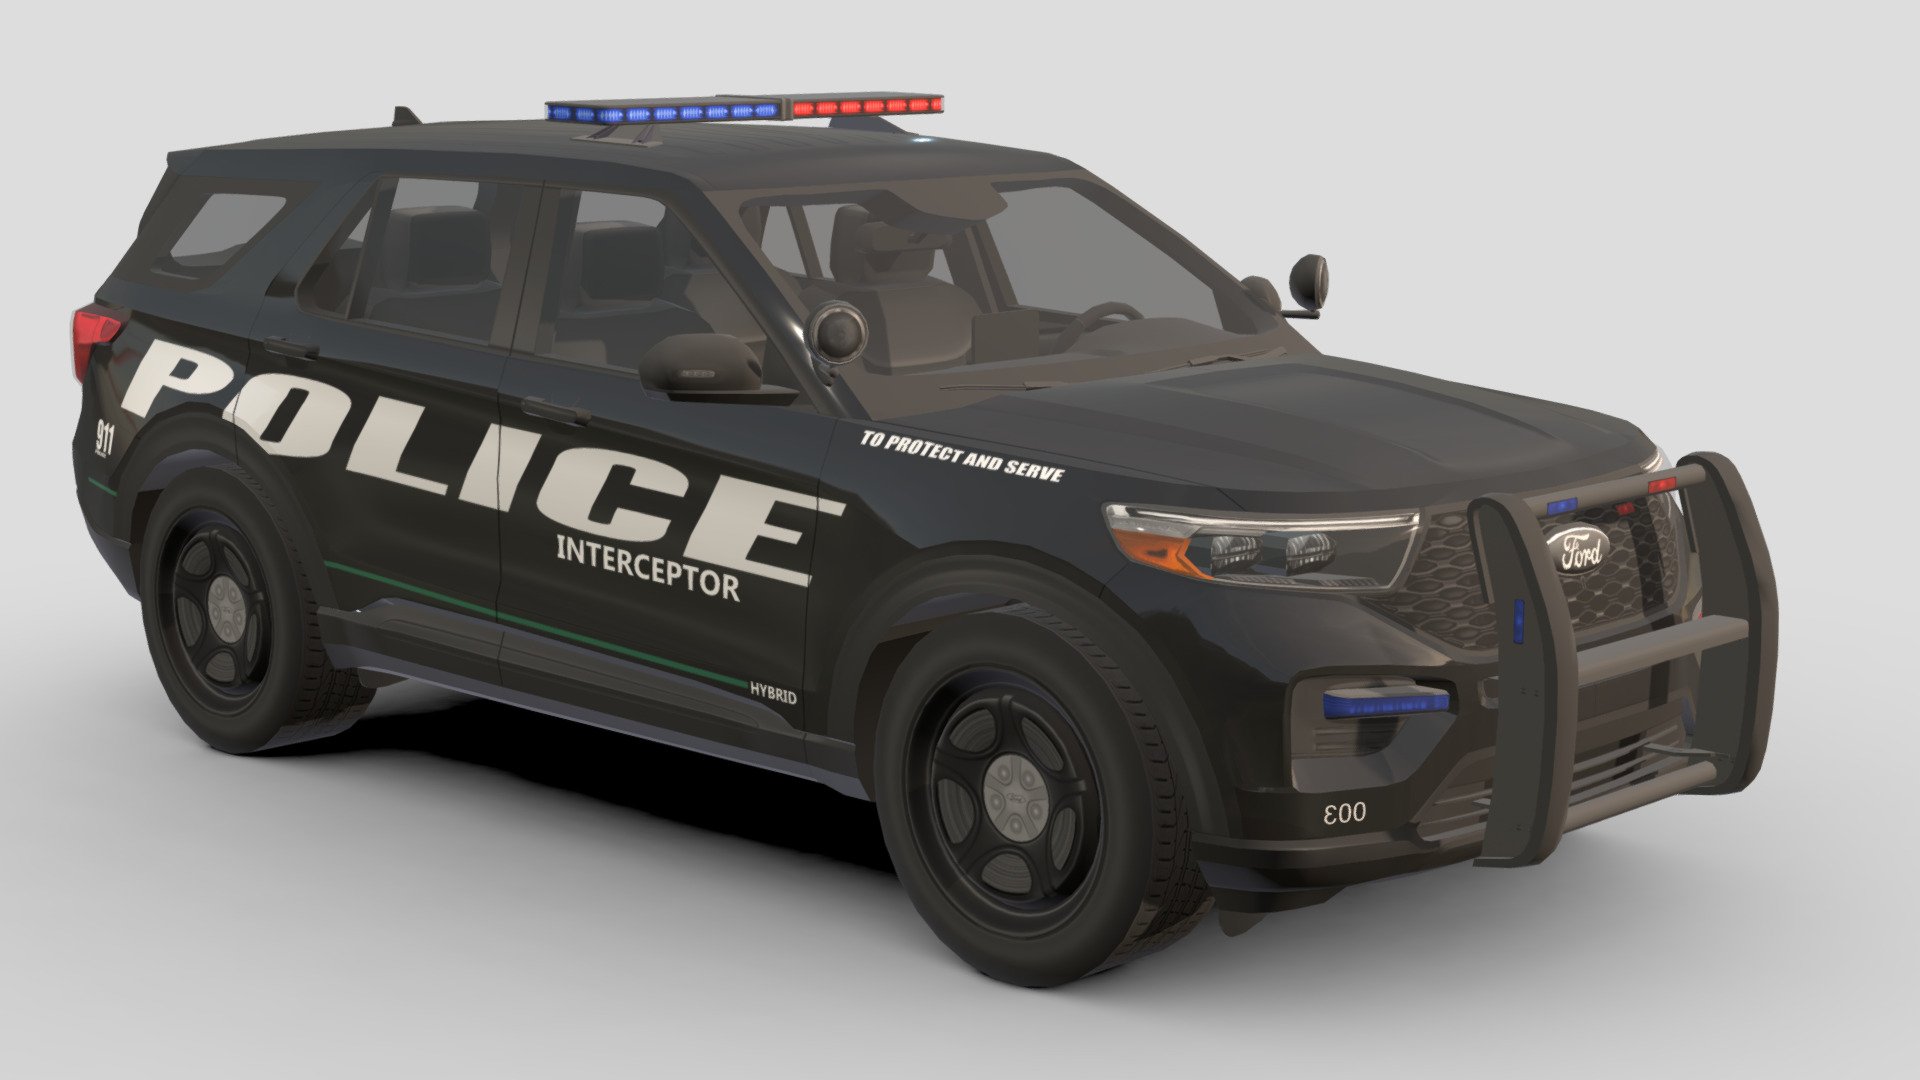 Police Car #1

You can use these models in any game and project.

Low-poly

Average poly count : 30,000

Average number of vertices : 30,000

Textures : 4096 / 2048 / 1024

High quality texture.

format : fbx , obj , 3d max

Isolated parts (Door, steering wheel, wheels, body) 3d model